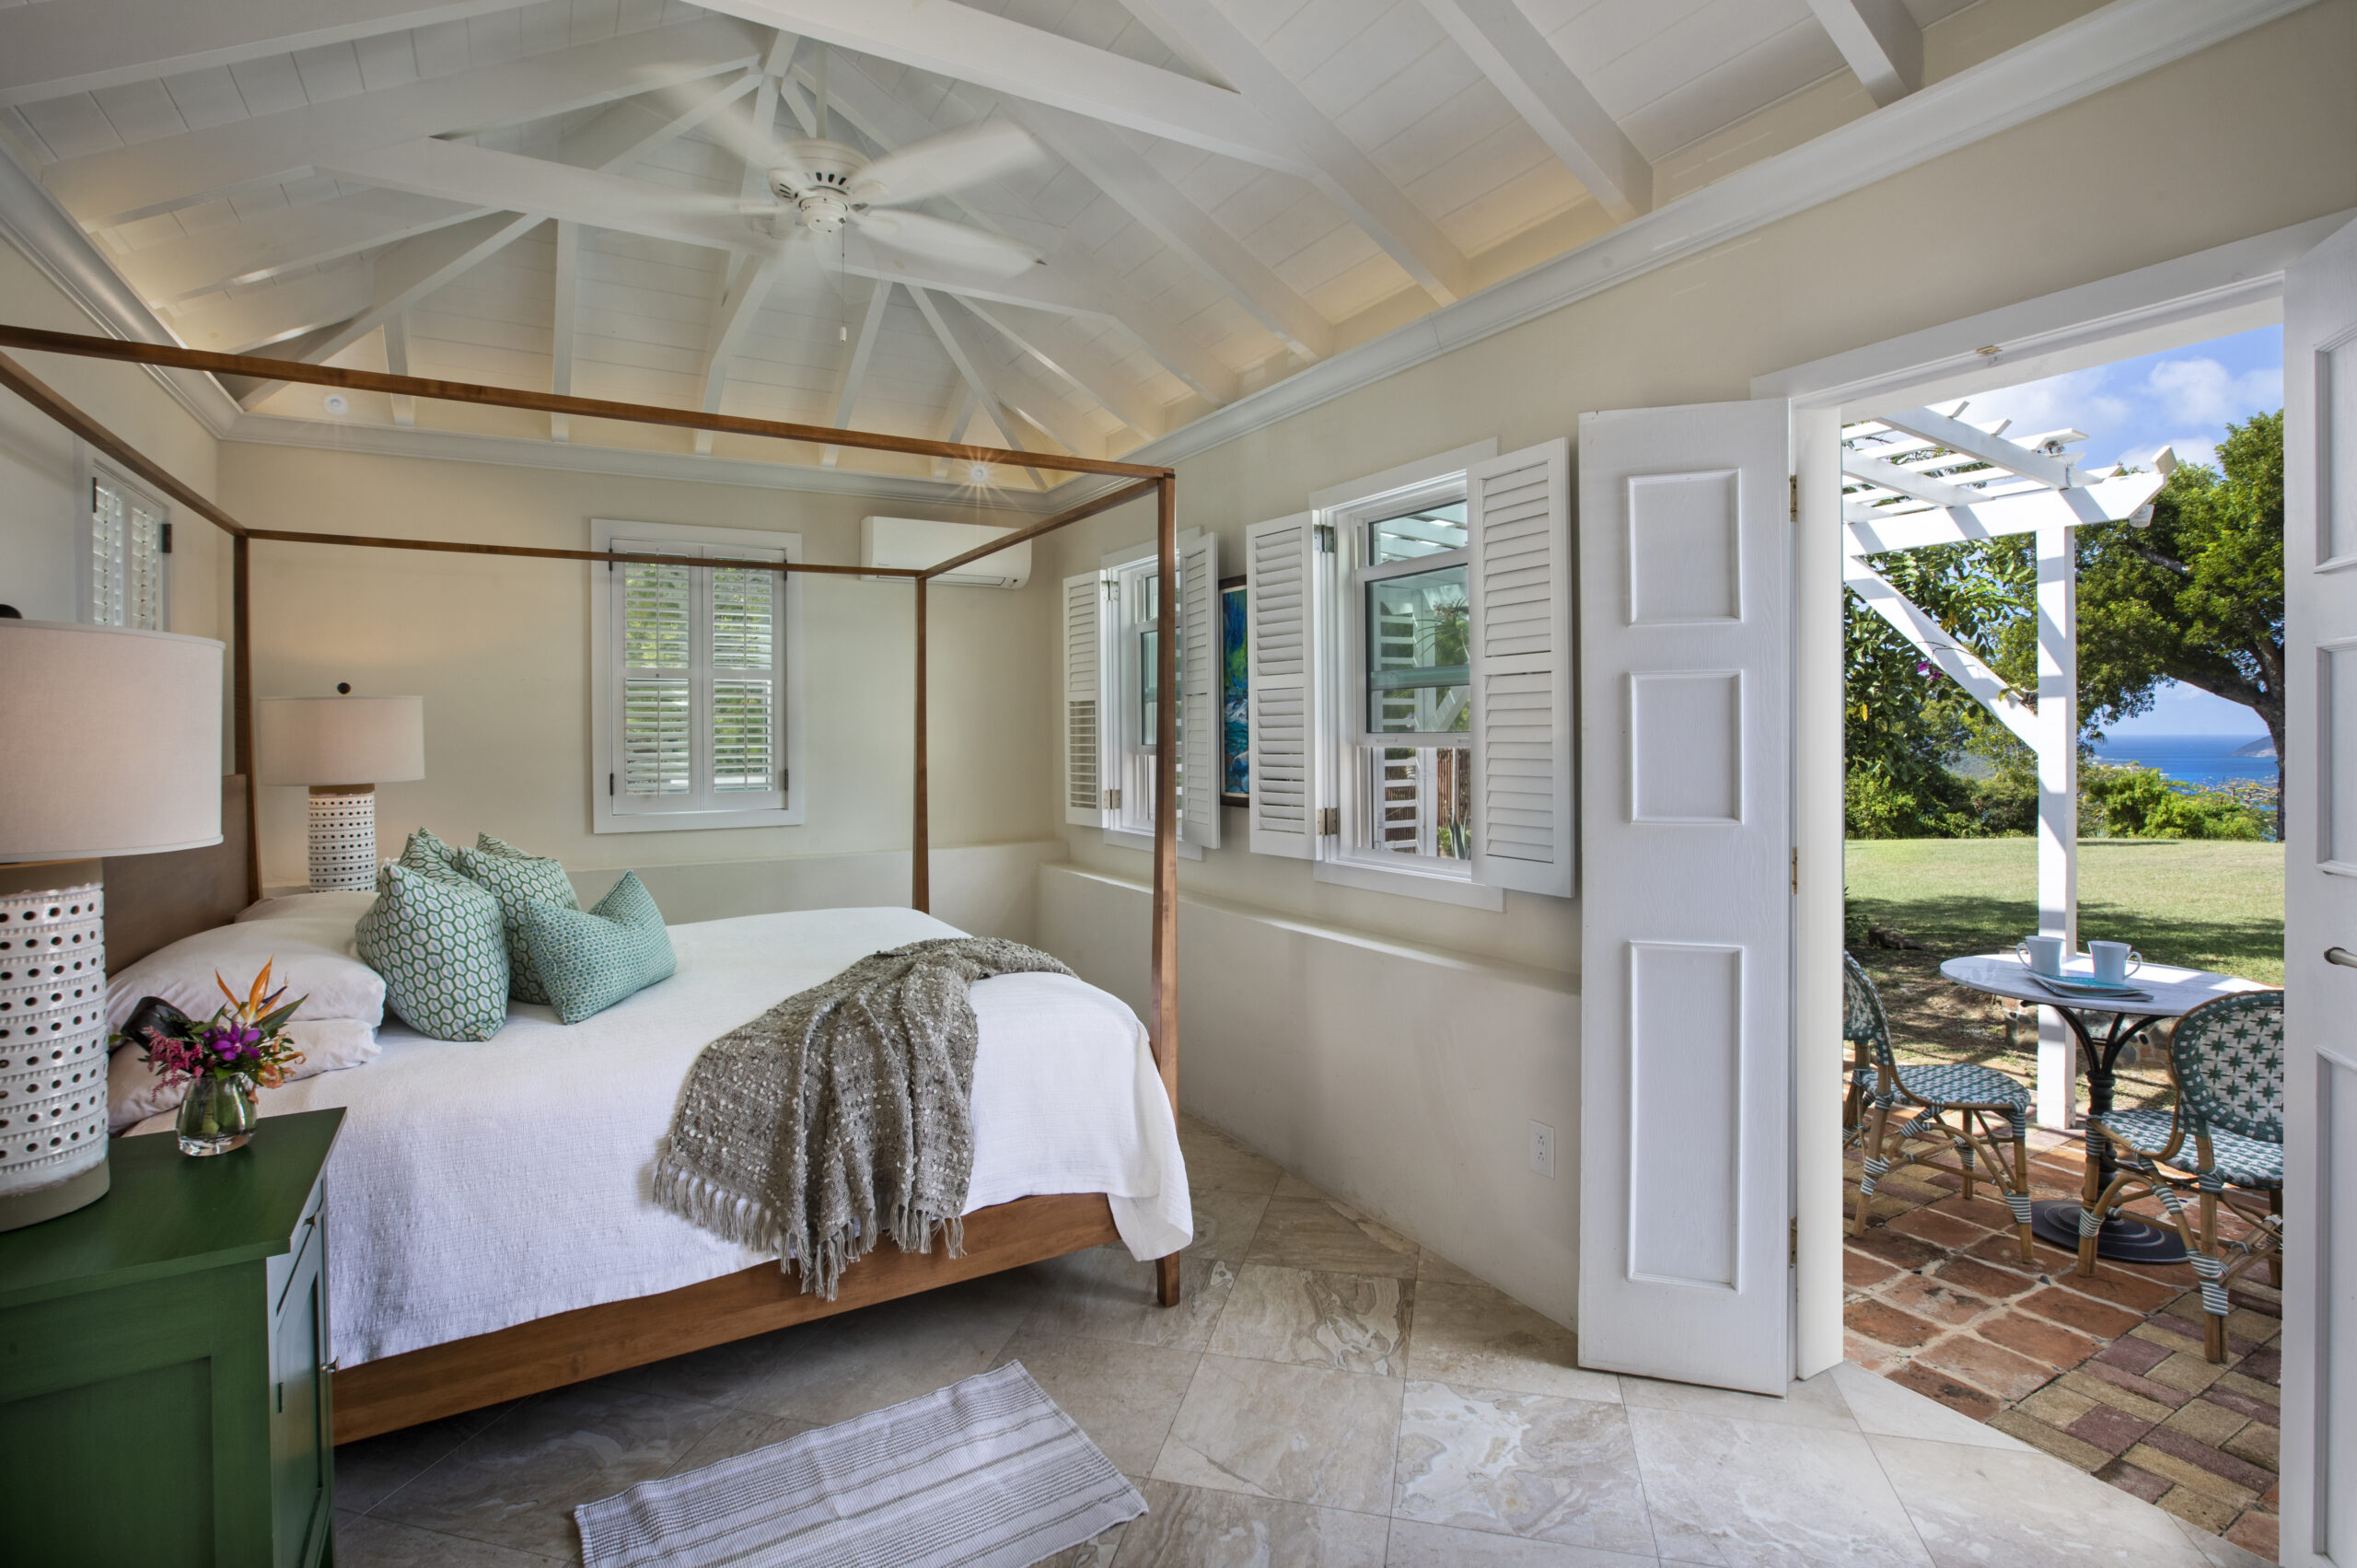 Vacation Rental bedroom design with access to al fresco dining right outside your bedroom